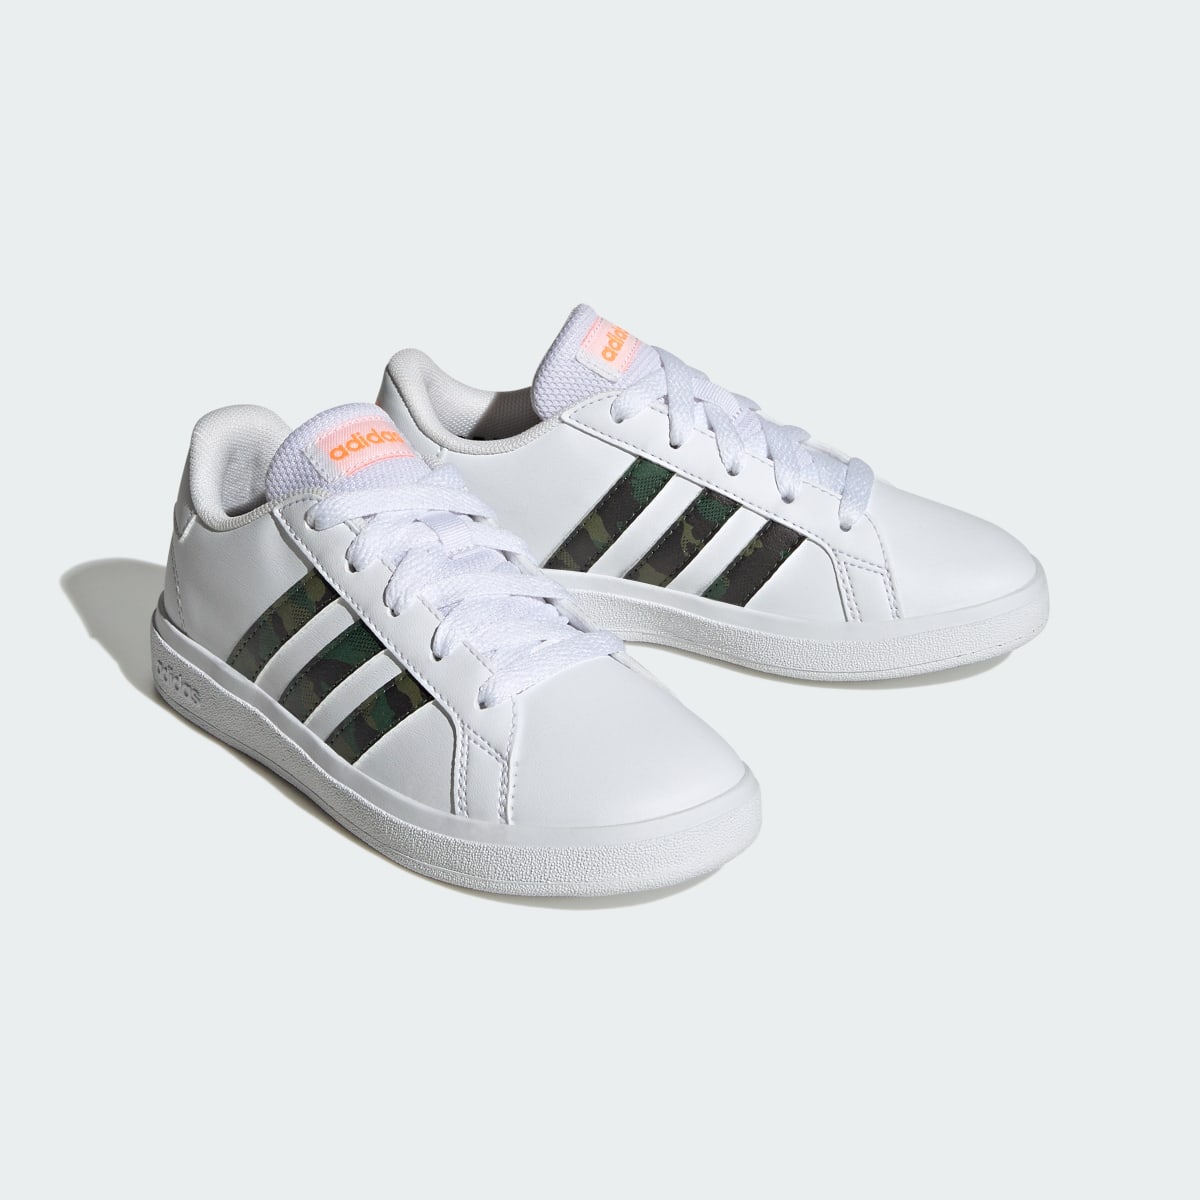 Adidas Grand Court Lifestyle Lace Tennis Shoes. 5